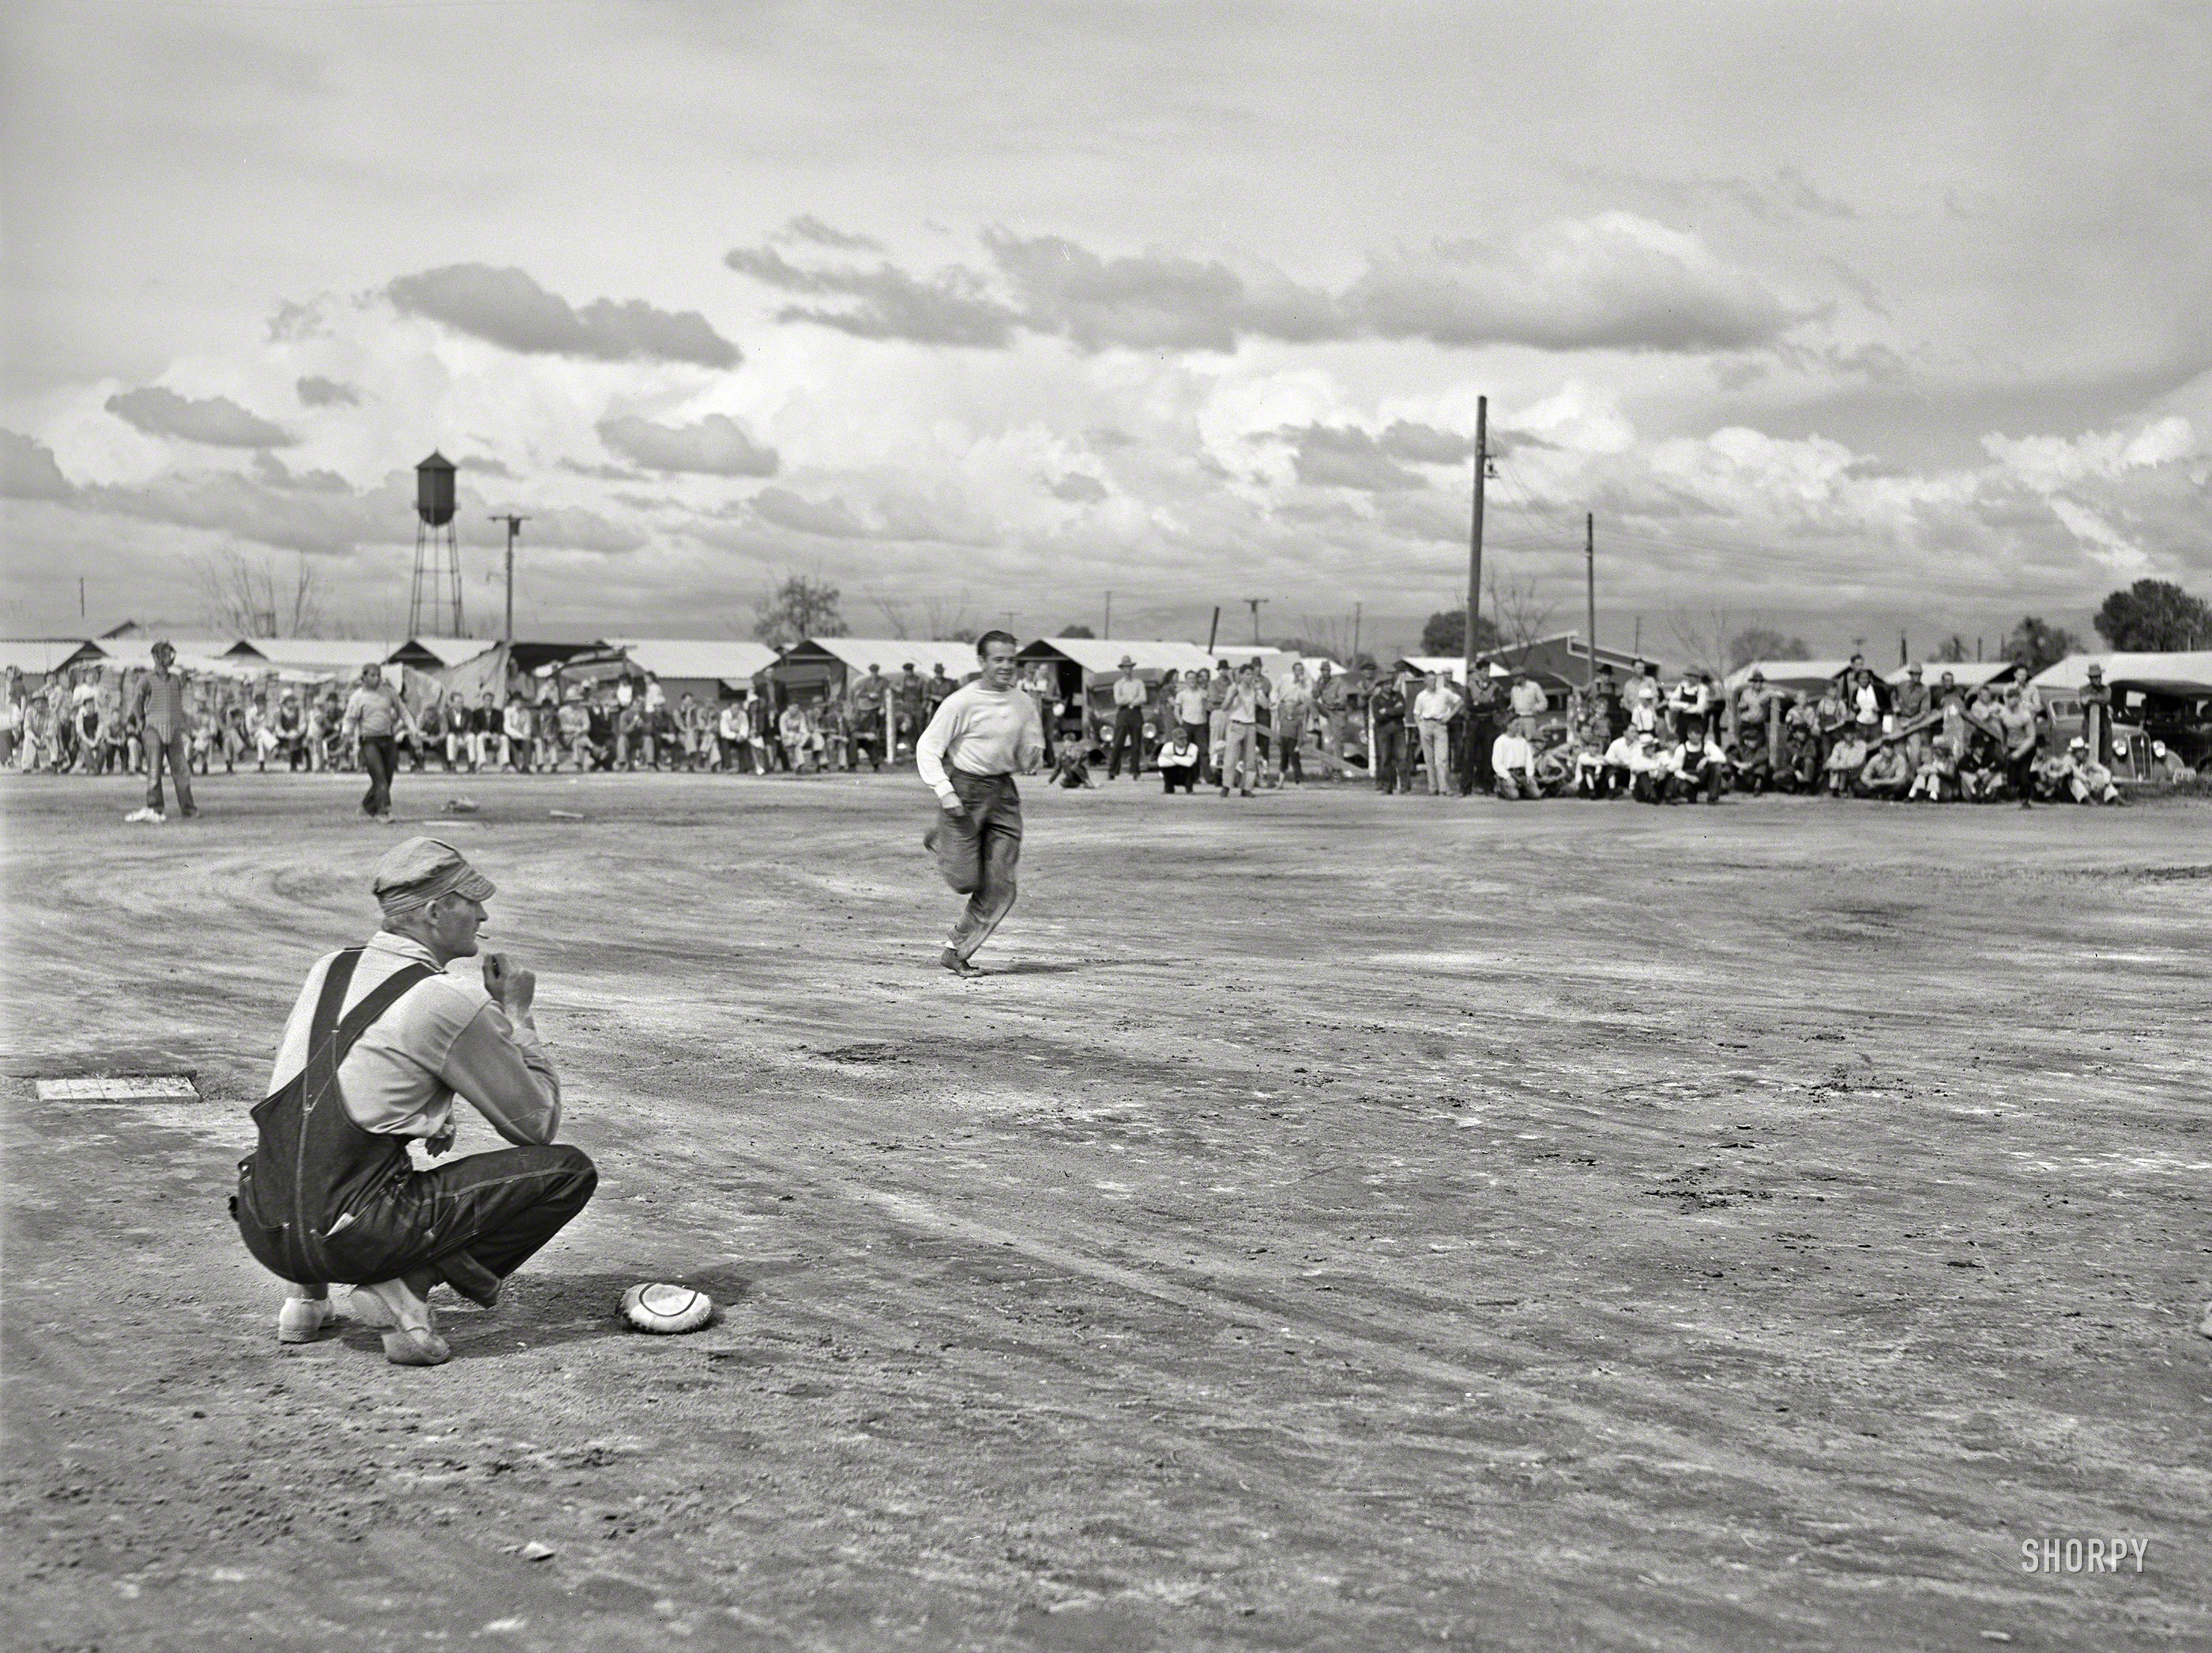 March 1940. "Baseball game at Tulare migrant camp. Visalia, California." Photo by Arthur Rothstein for the Farm Security Administration. View full size.